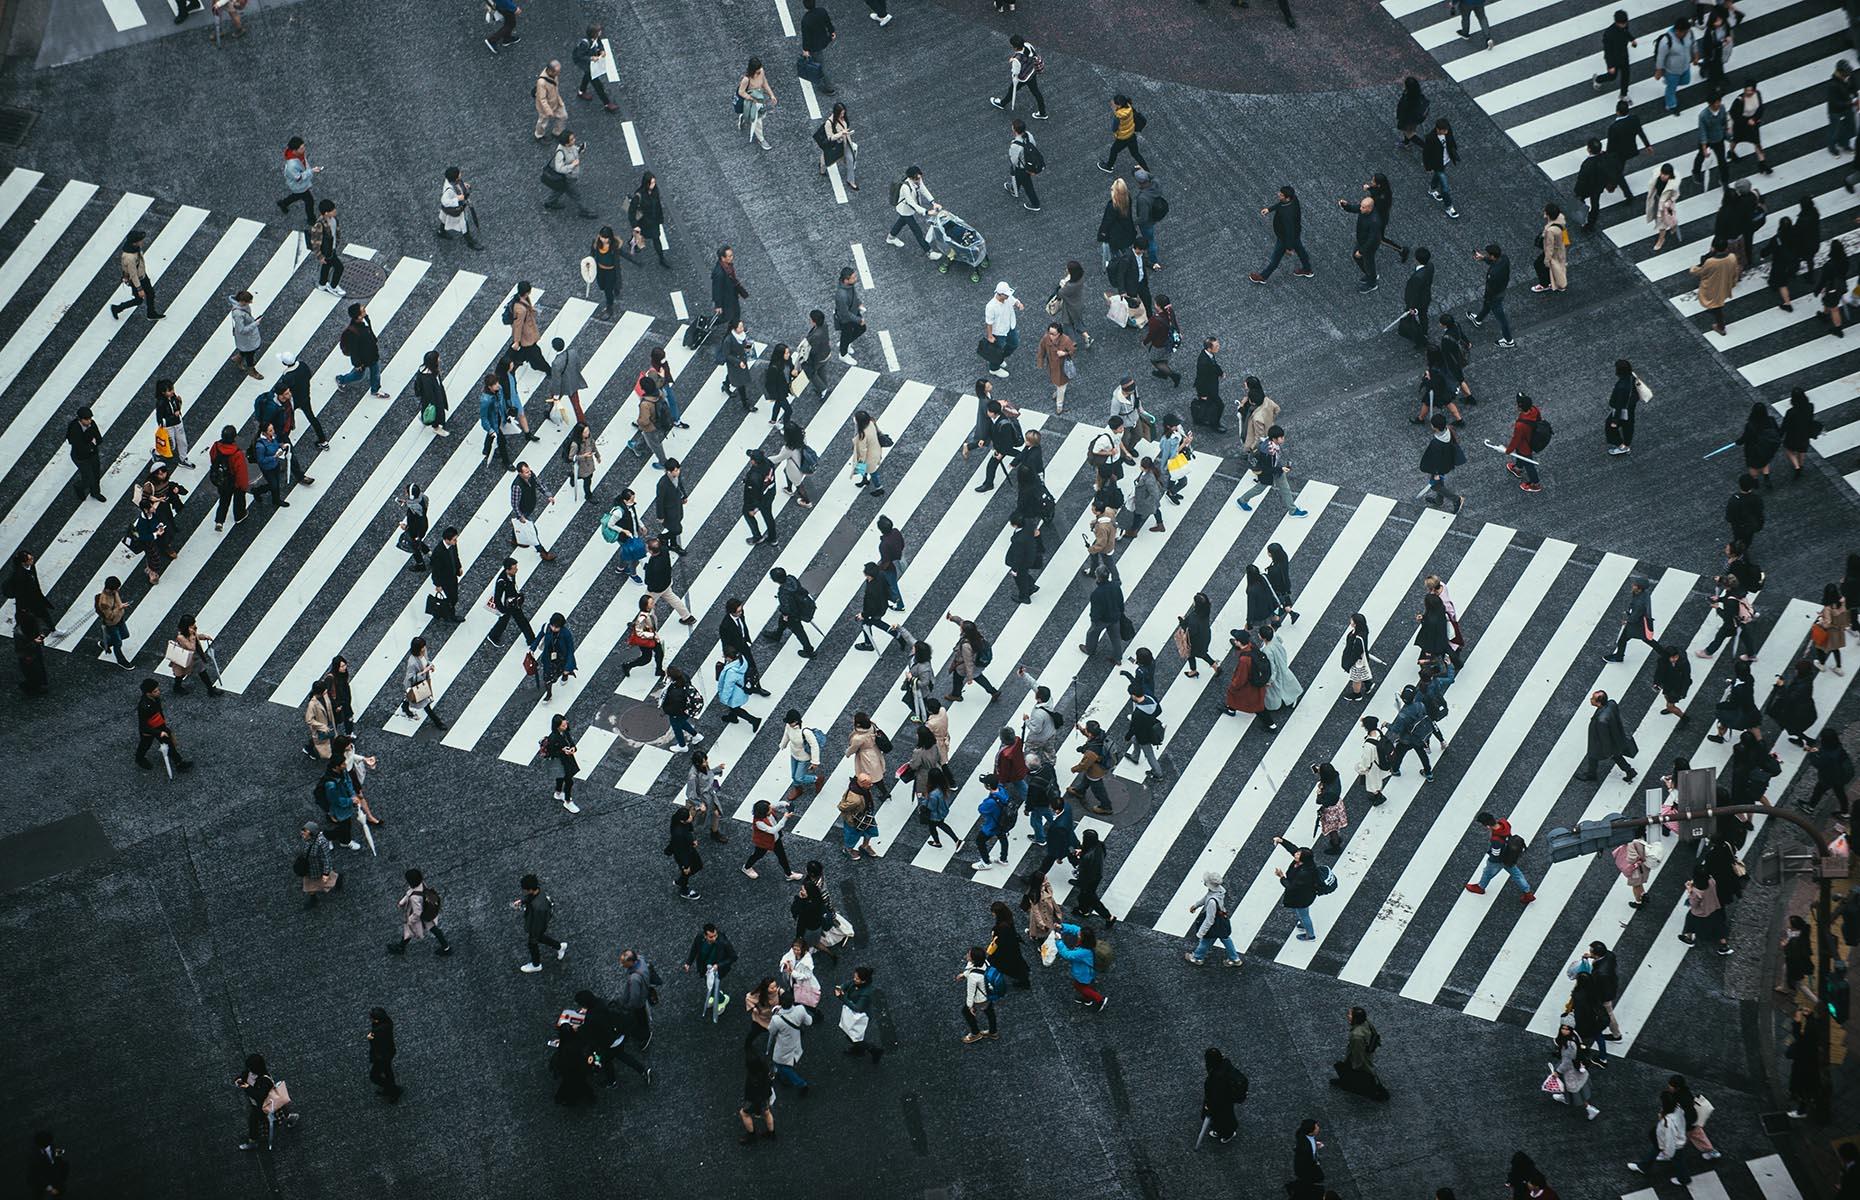 Deemed the world's busiest pedestrian crossing, you'll find it in an Asian capital, home to almost 10 million residents.